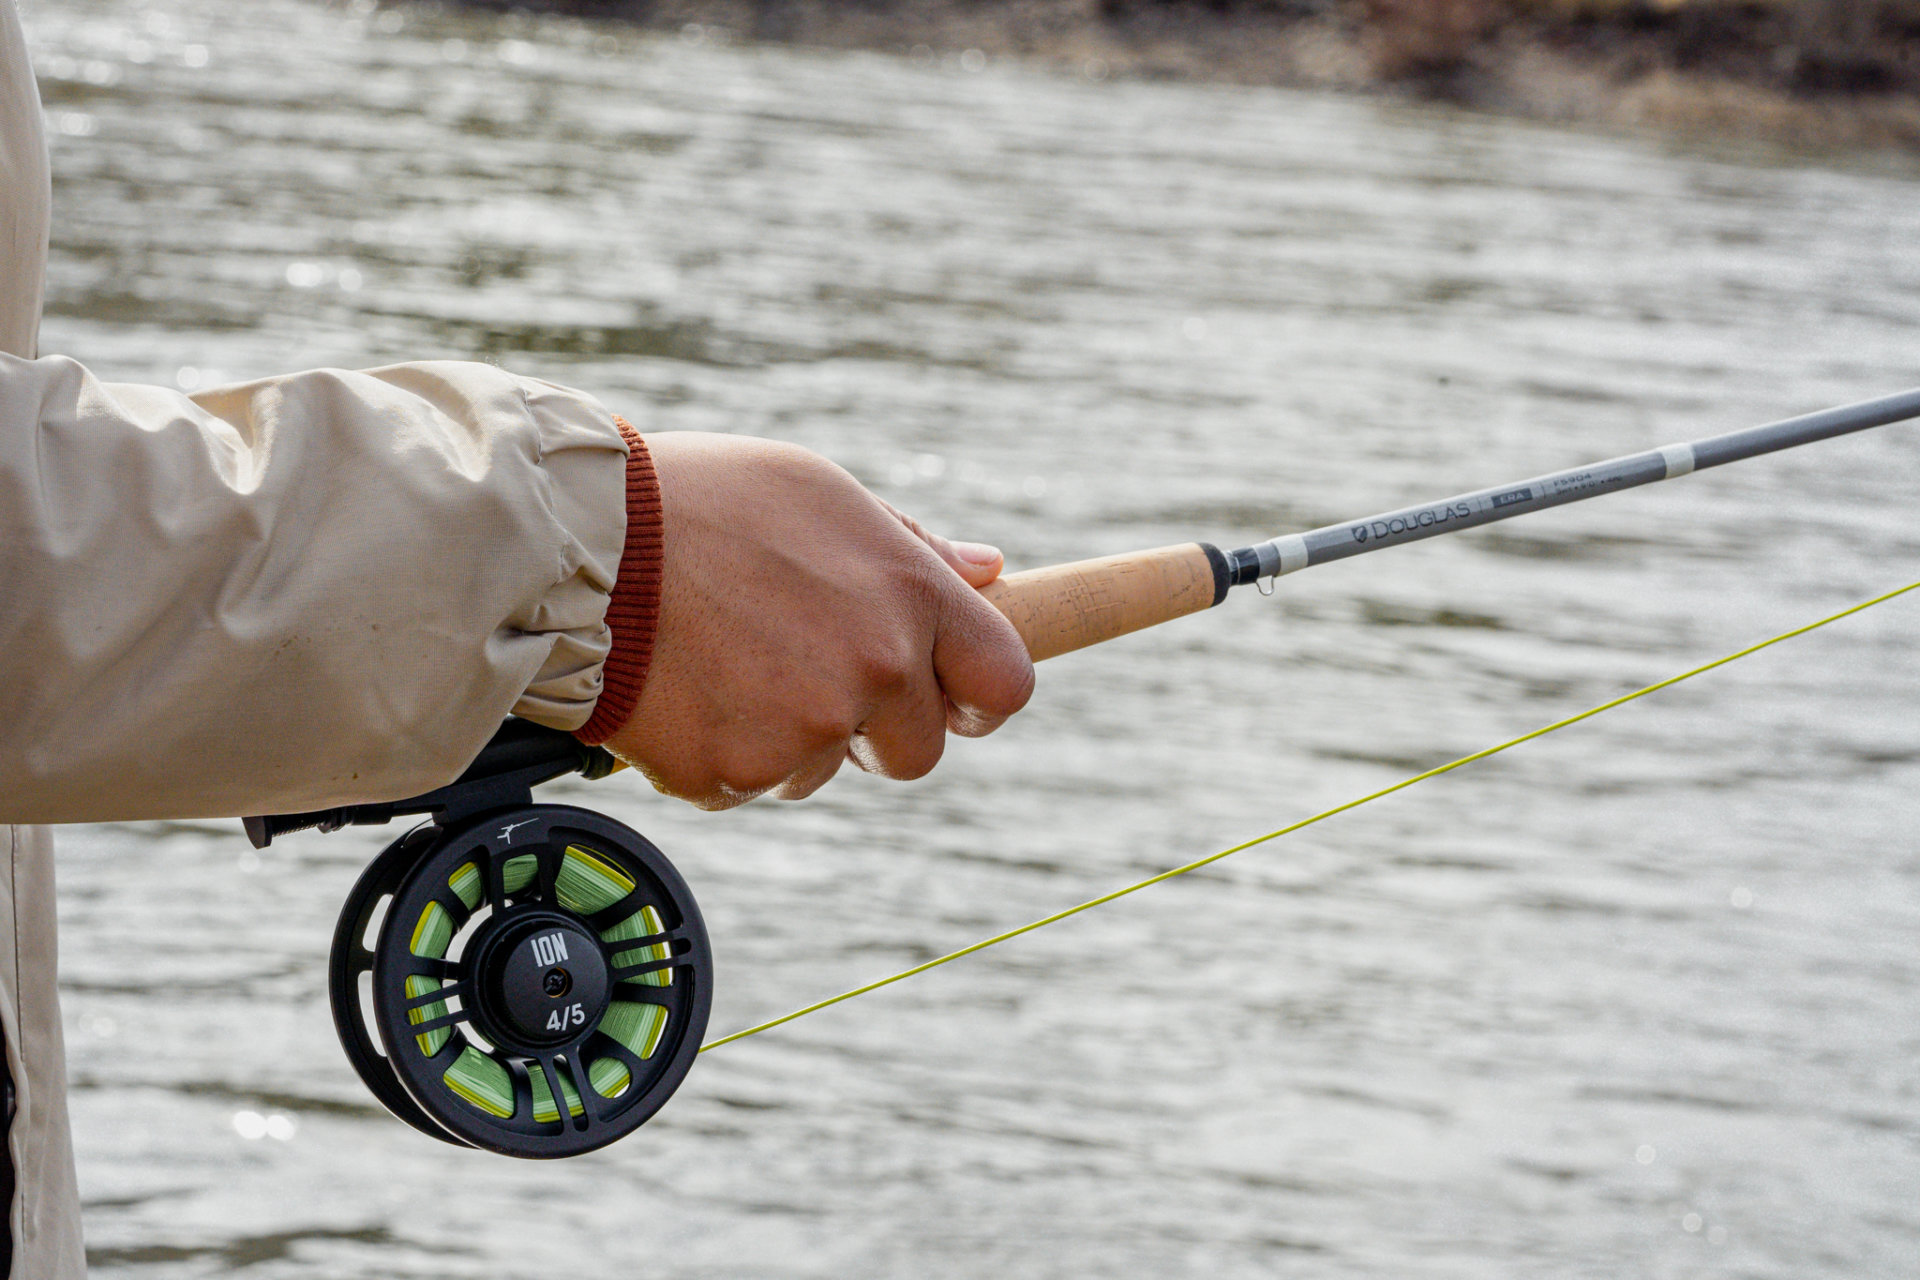 Rod handles, your grip, and their relation to injuries • FlyFish Circle